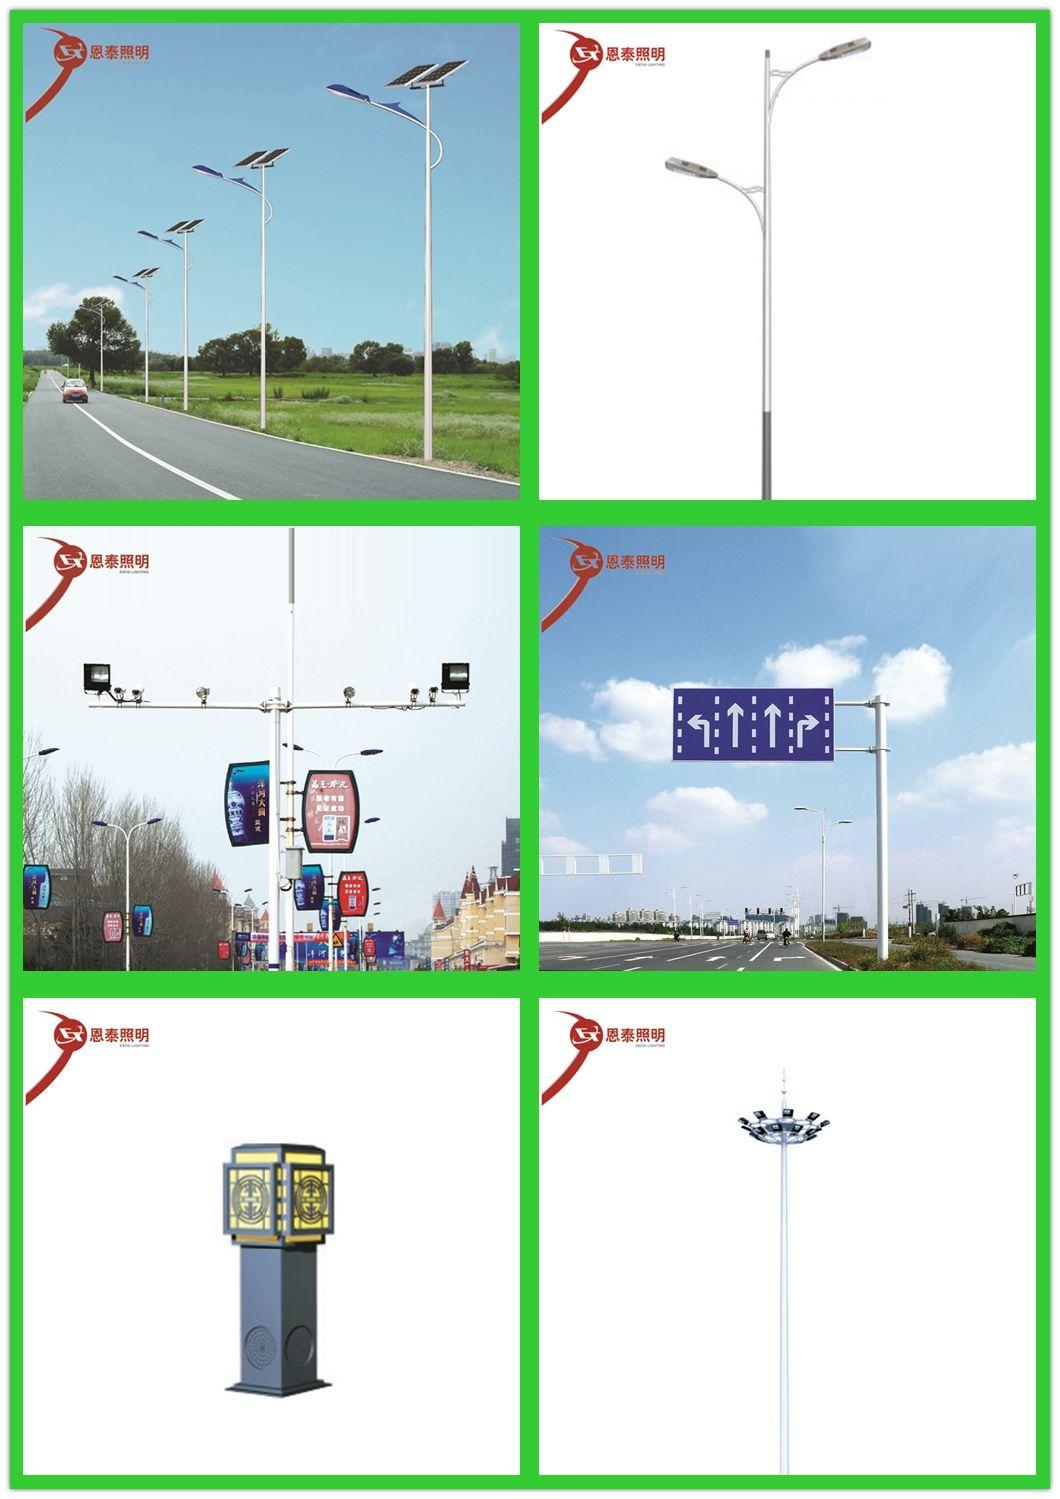 Bright ABS 30W DC LED All in One Solar Street Light Specifications